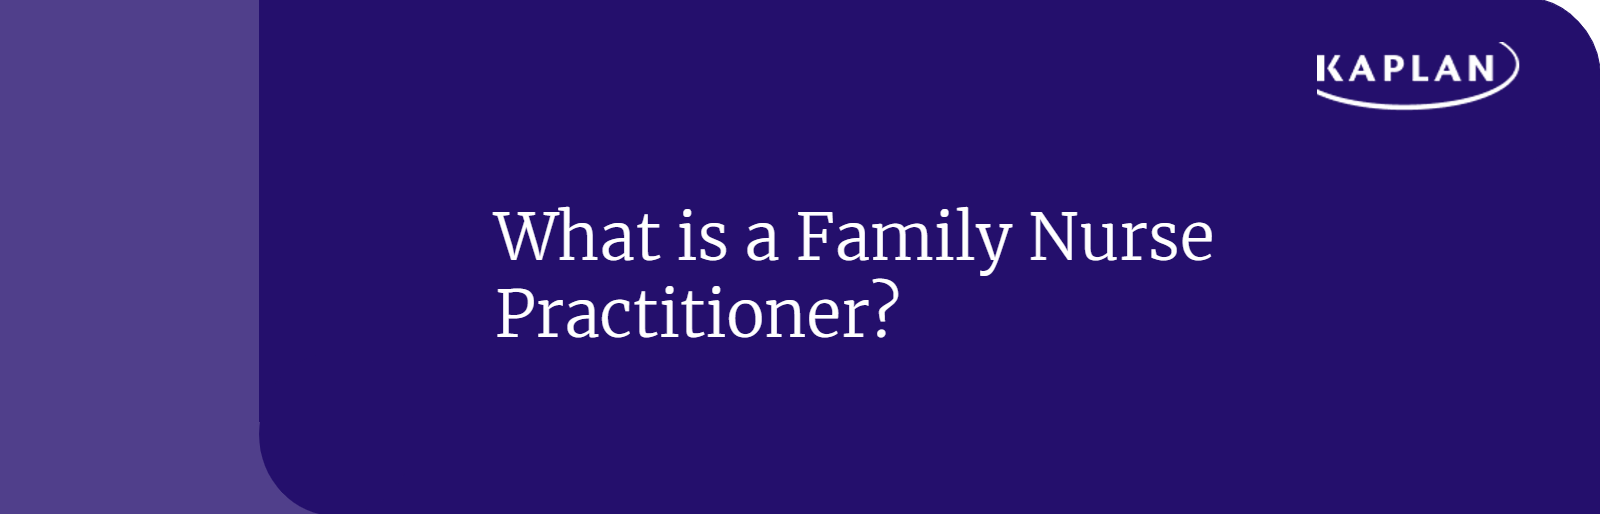 What is a Family Nurse Practitioner?